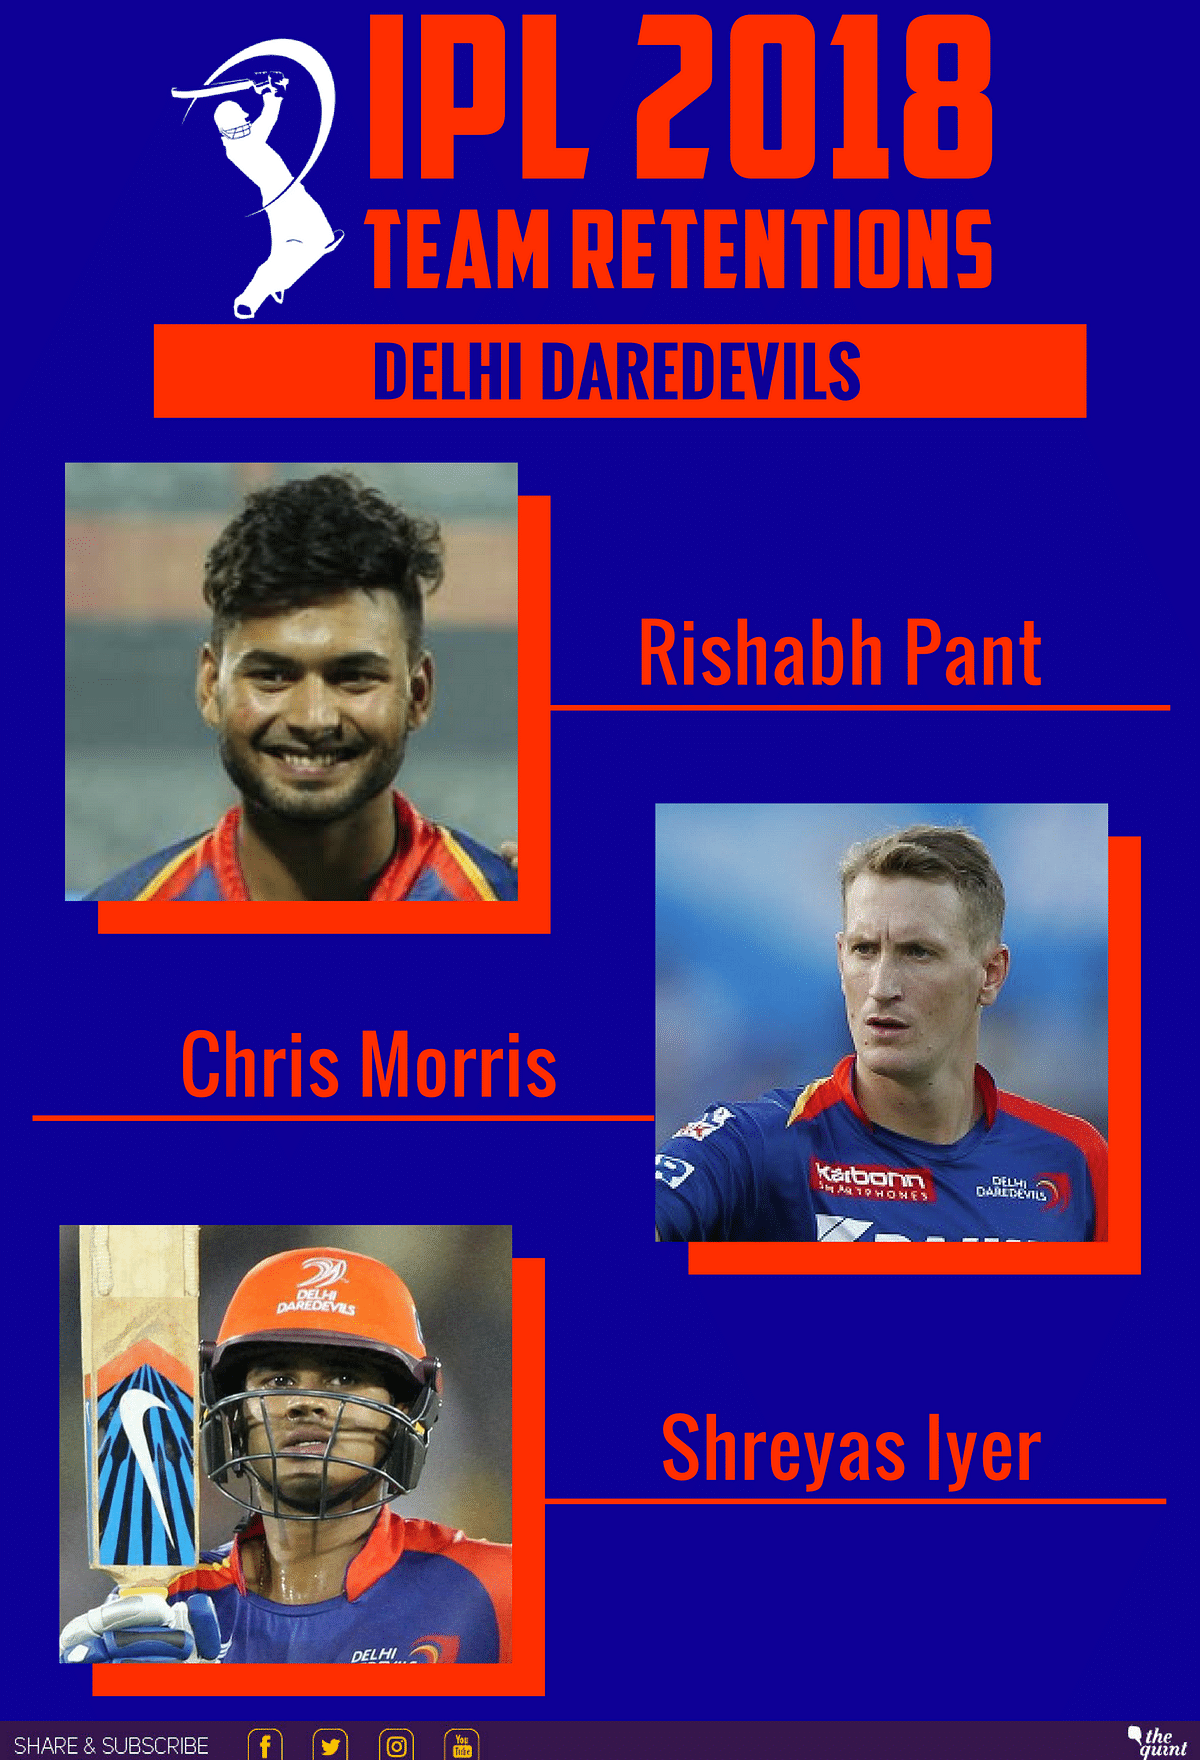 Delhi Daredevils retain their full quota of three players, going with two Indians and South Africa’s Chris Morris.